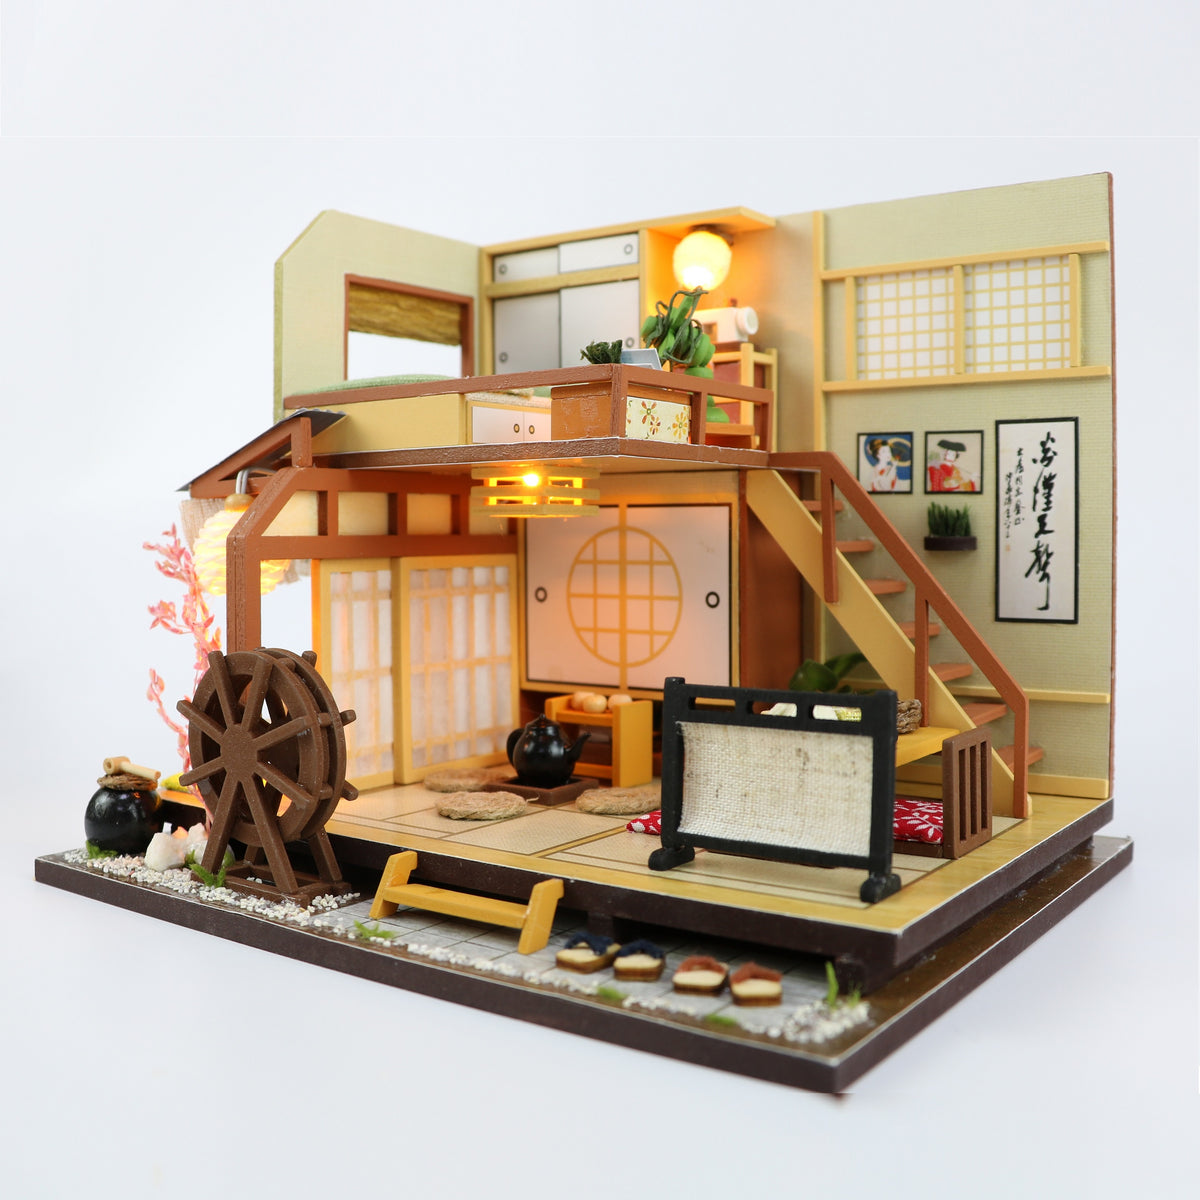 Getting Started with Dollhouses